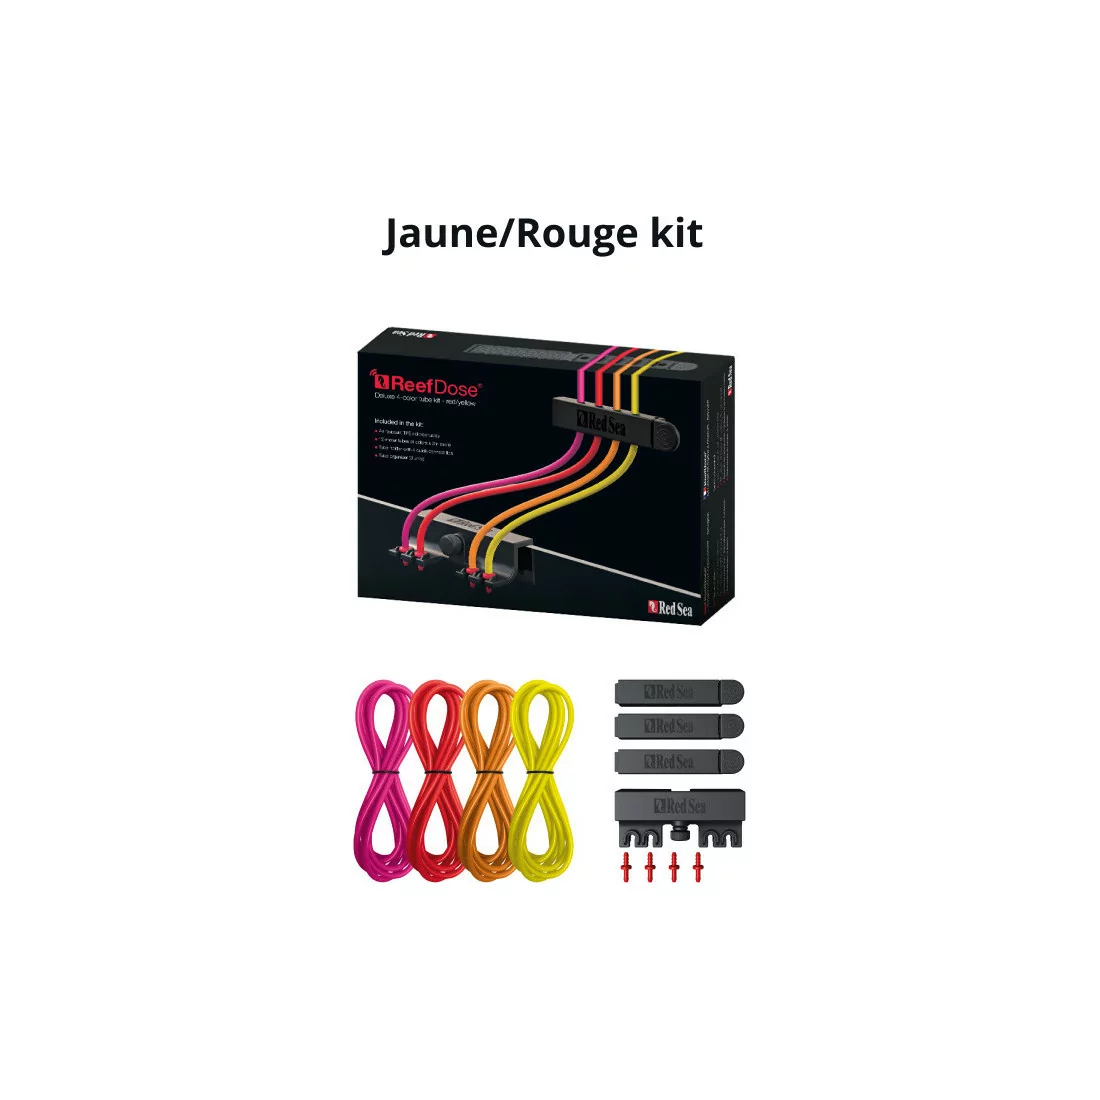 Deluxe 4-color (Yelow/Red) hose kit for Reefdose